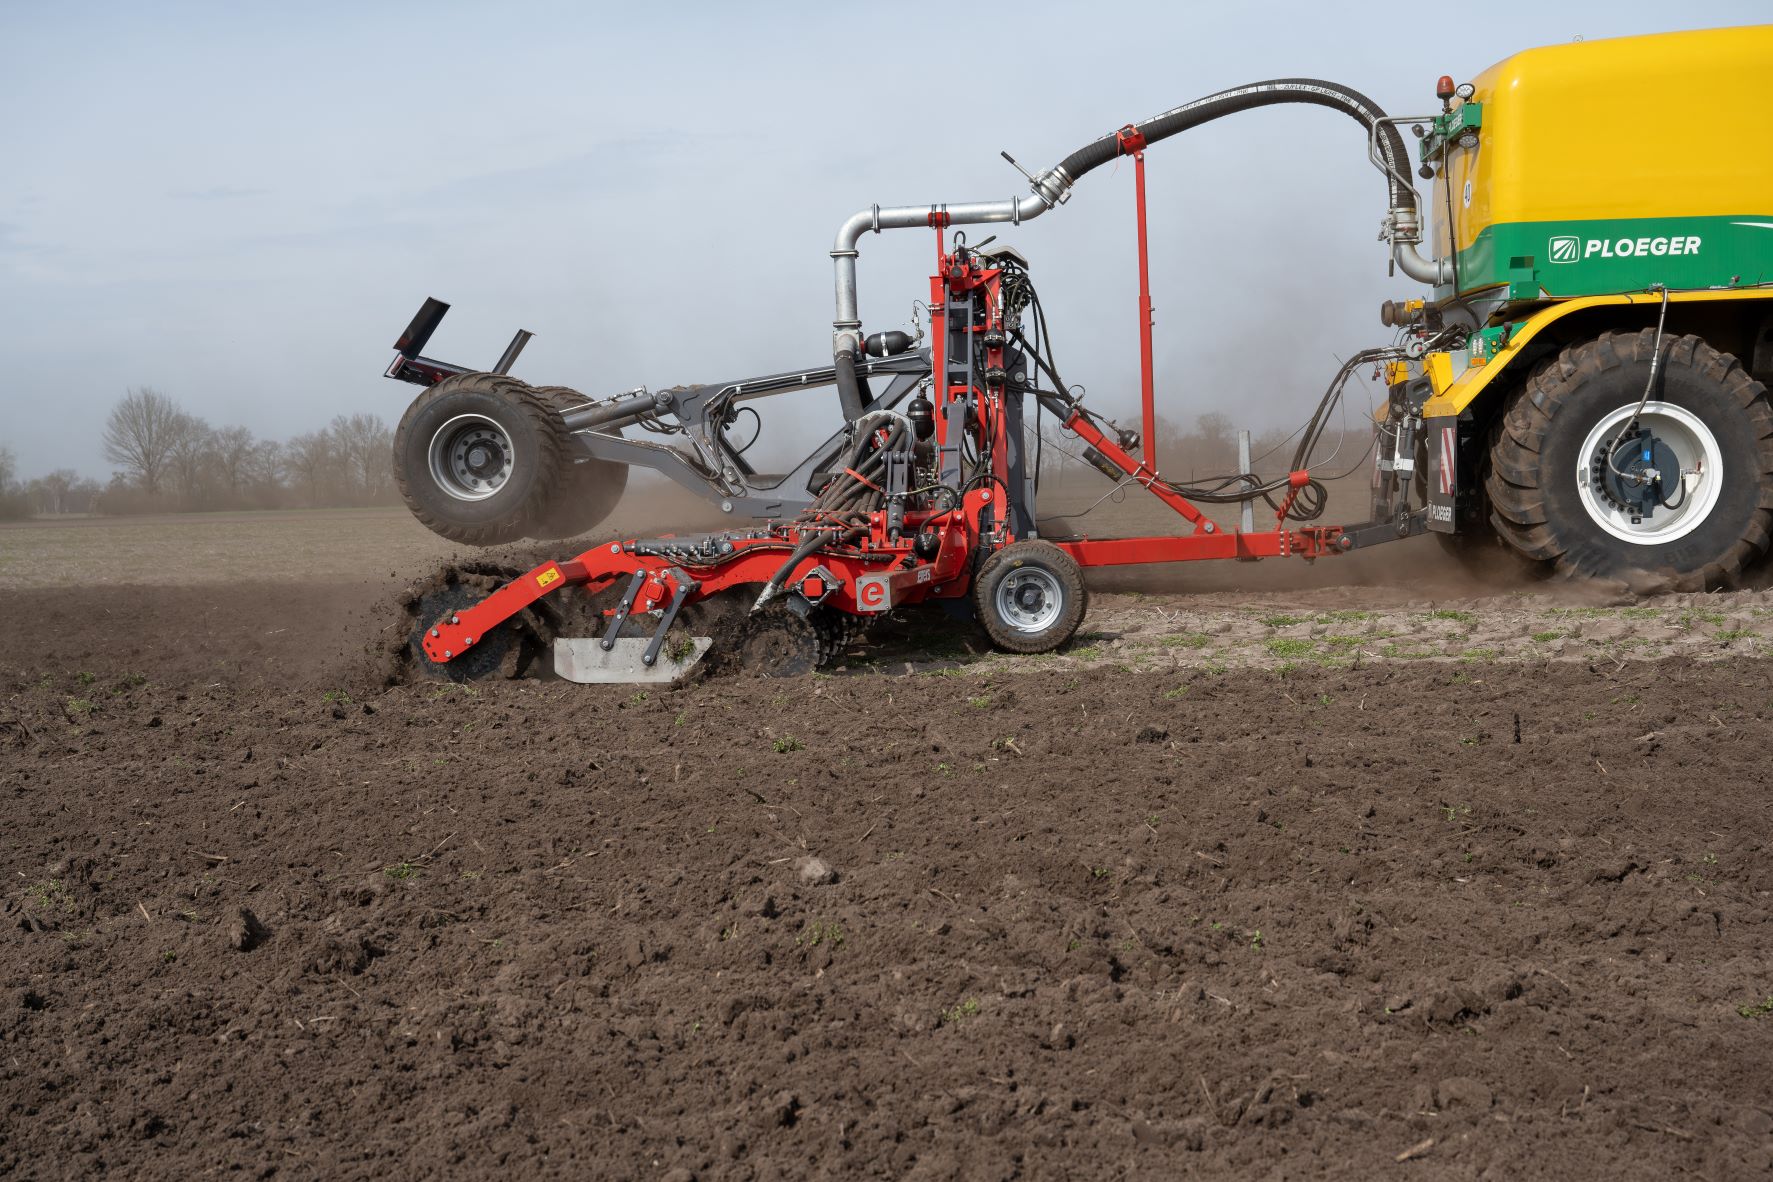 Evers slurry disc injector, Type Toric XL 1200 - slurry incorporation across a large working width 